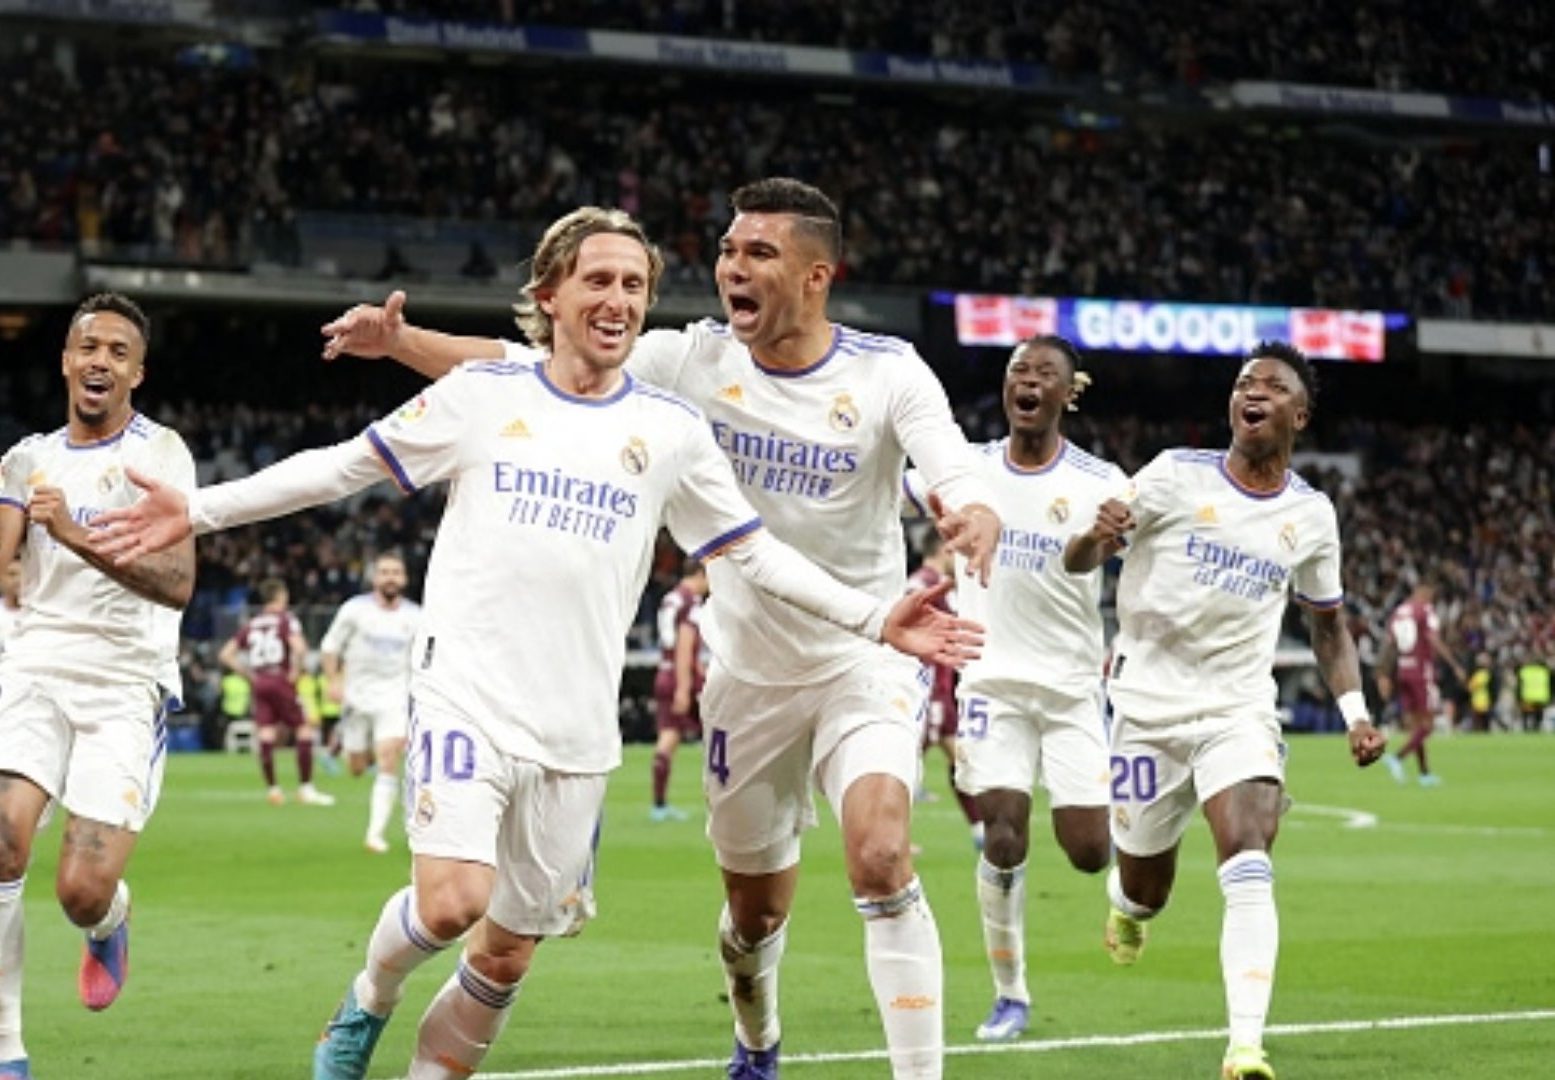 Real Madrid 4-1 Real Sociedad Highlights: League leaders Real Madrid go eight points clear after beating Sociedad with an impressive team effort